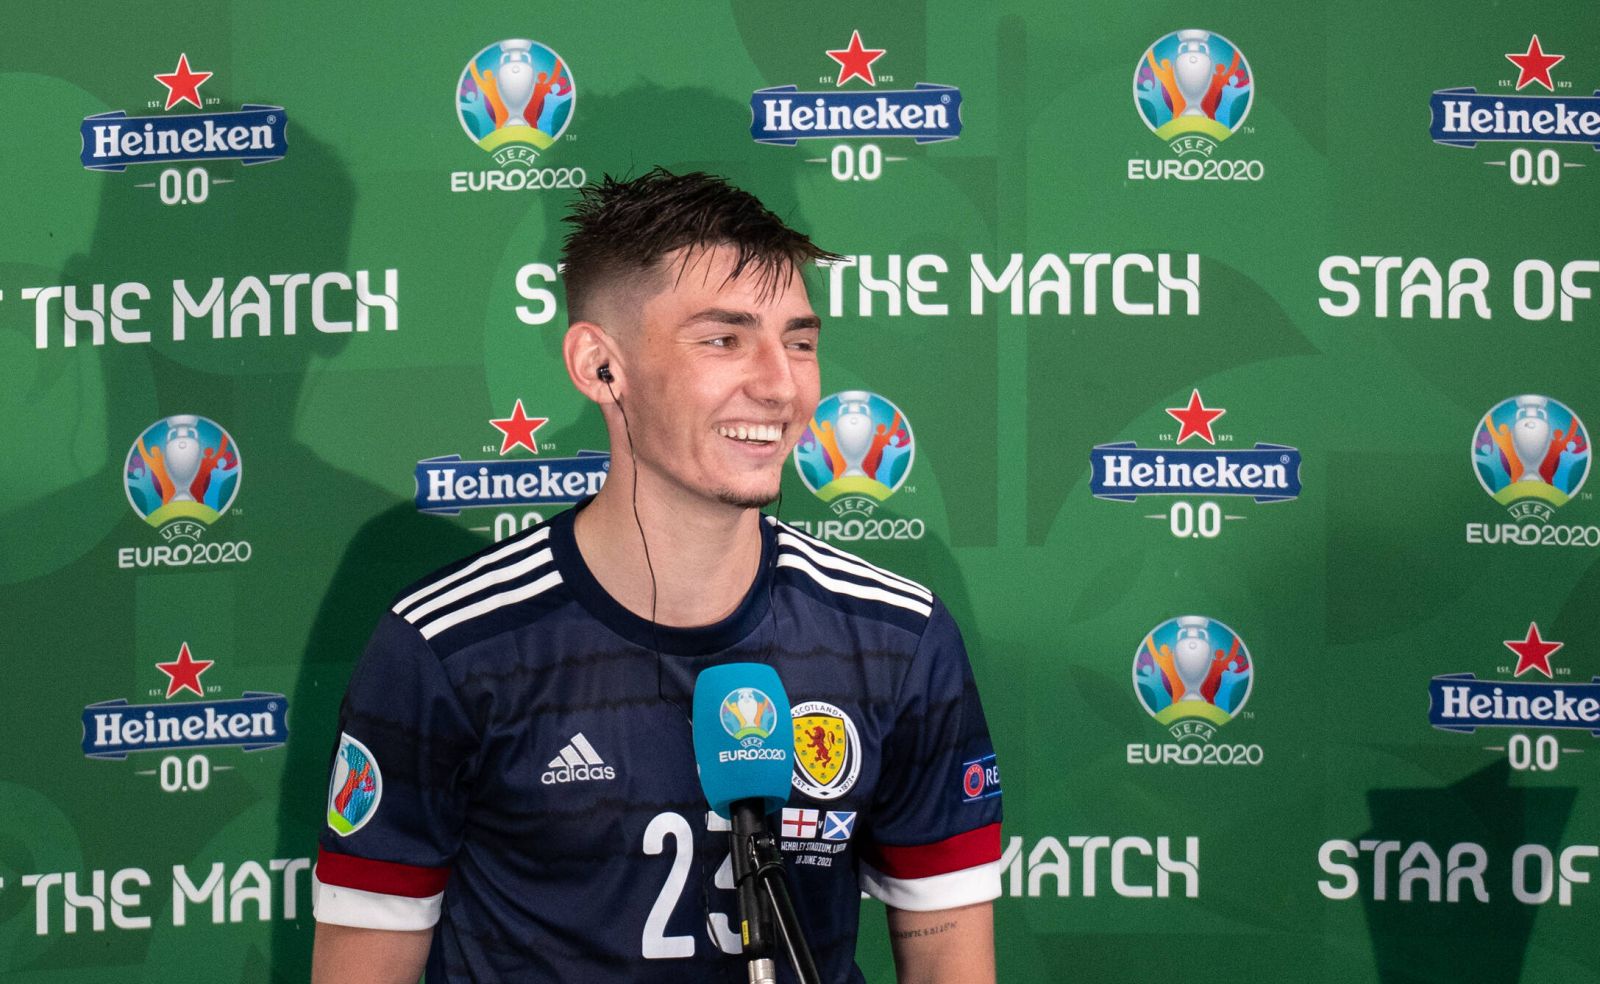 Billy Gilmour Chelsea of Scotland is named Star of the match during the UEFA 2020 European Championship, EM, Europameisterschaft group match between England and Scotland at Wembley Stadium, London, England on 18 June 2021. PUBLICATIONxNOTxINxUK Copyright: xMarkxHawkinsx PMI-4258-0109